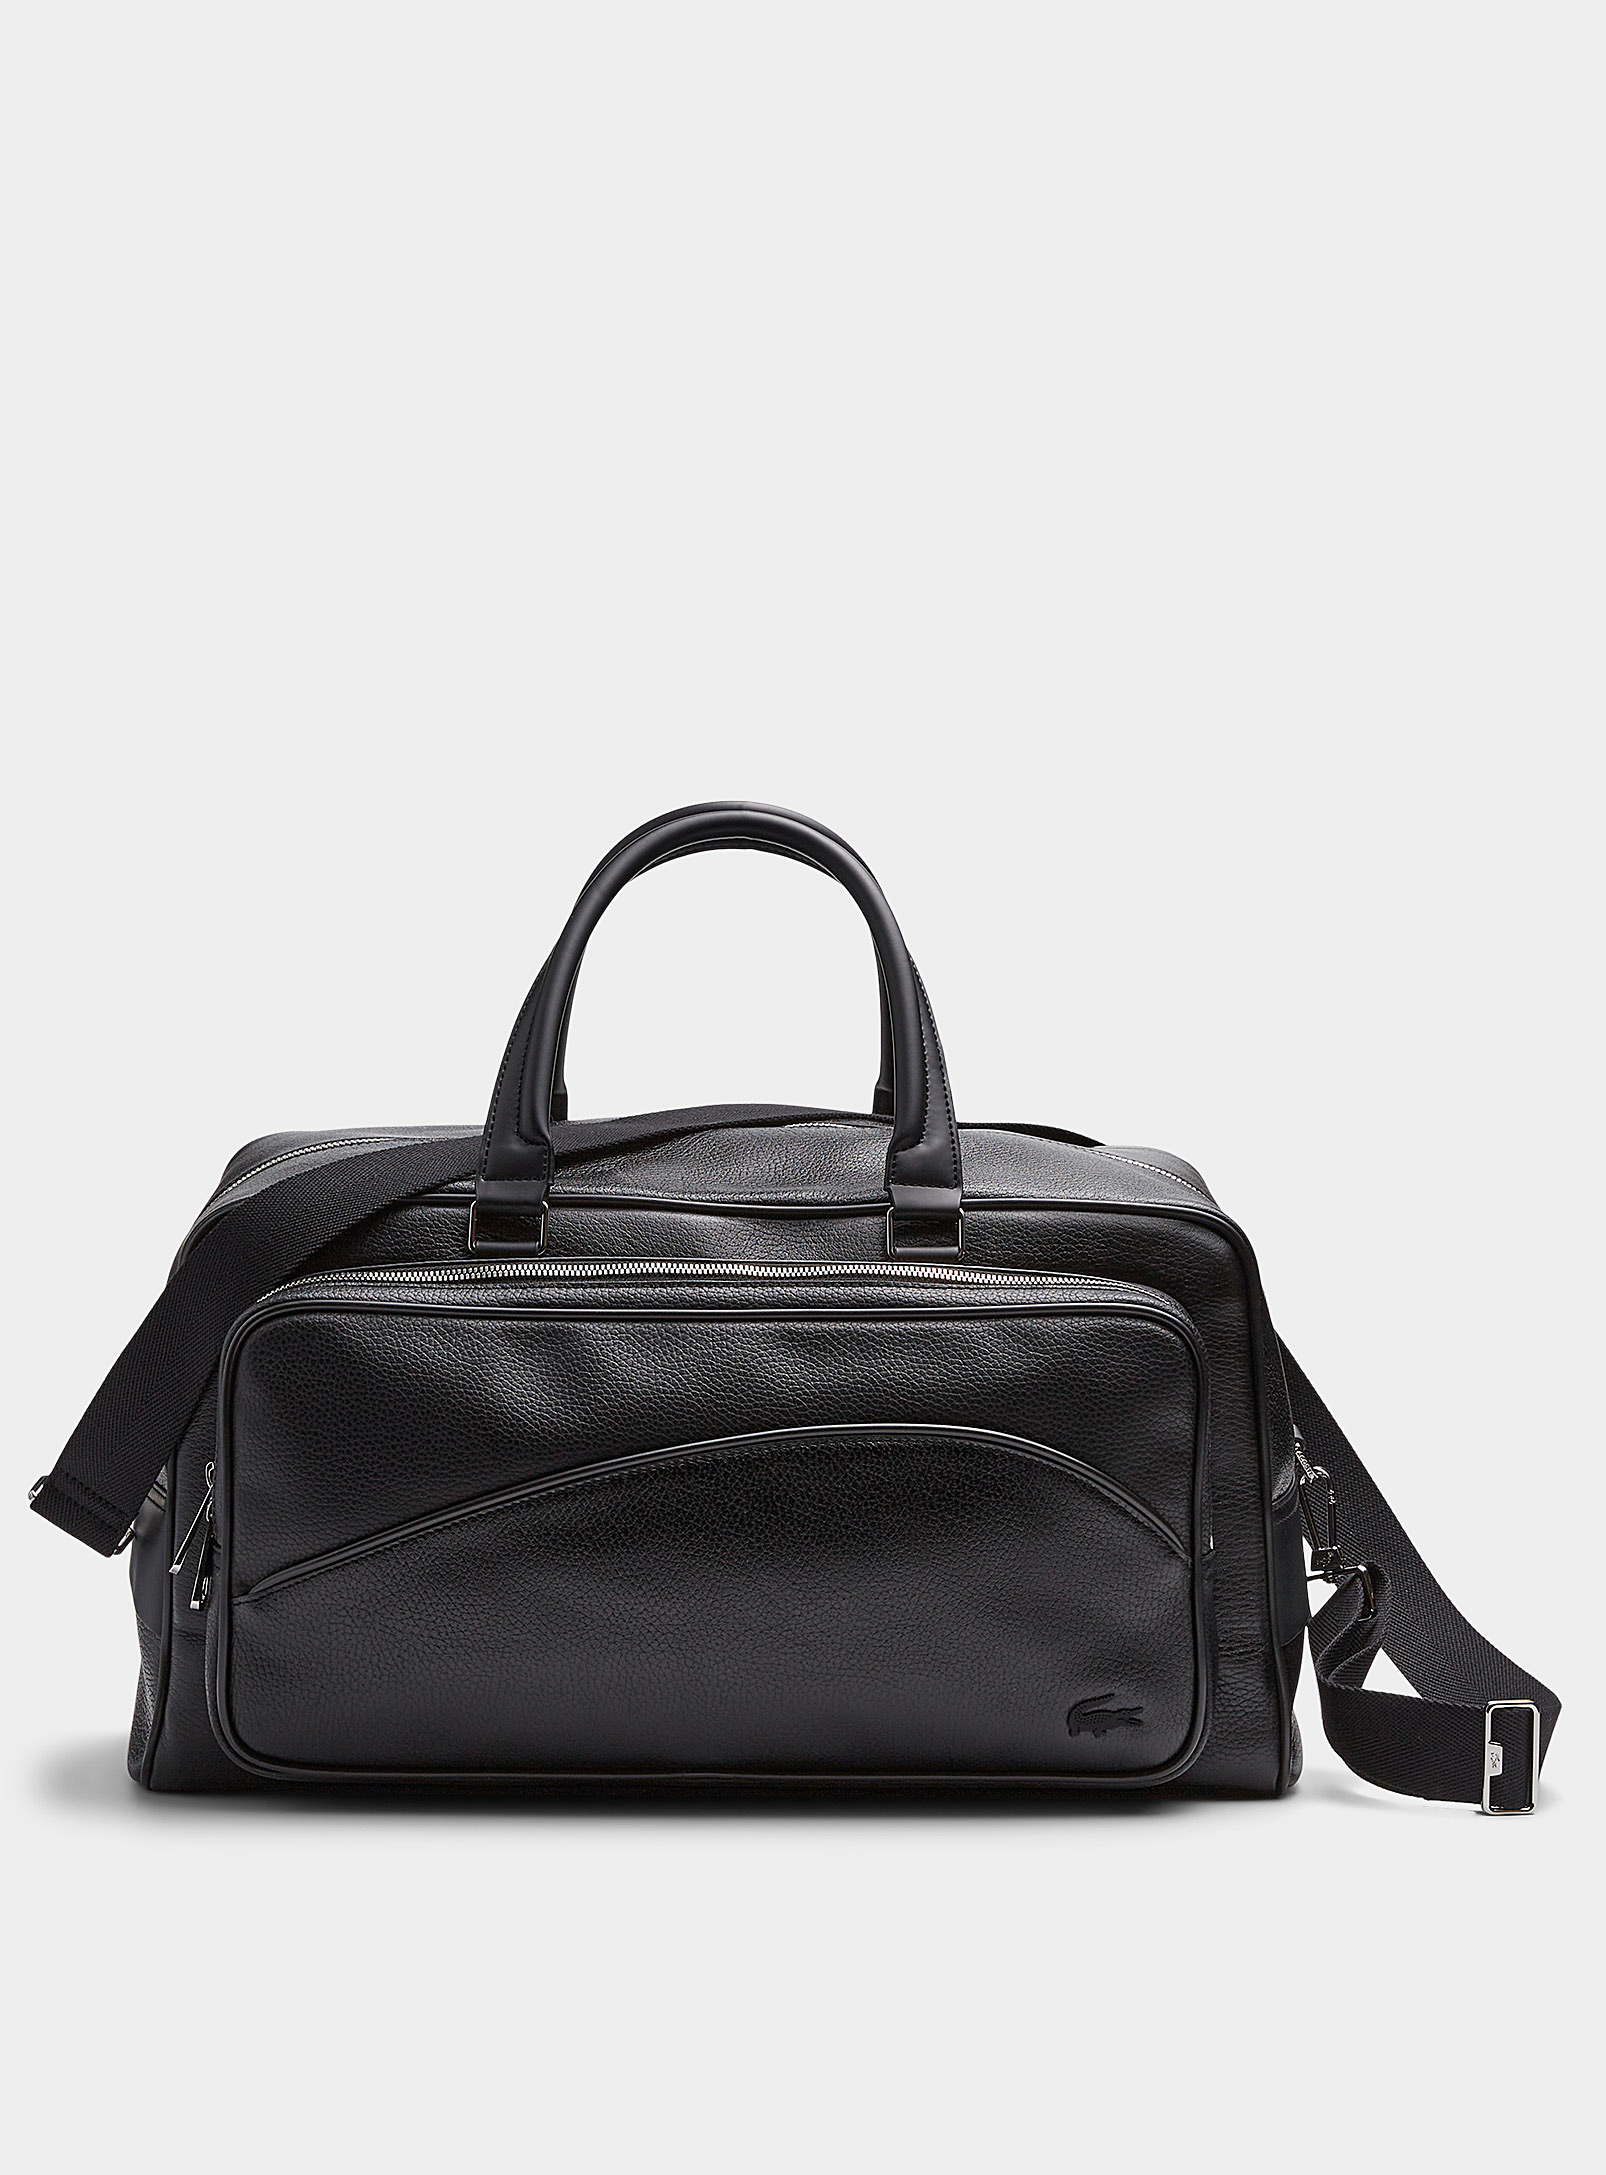 Lacoste - Men's Angy weekend bag